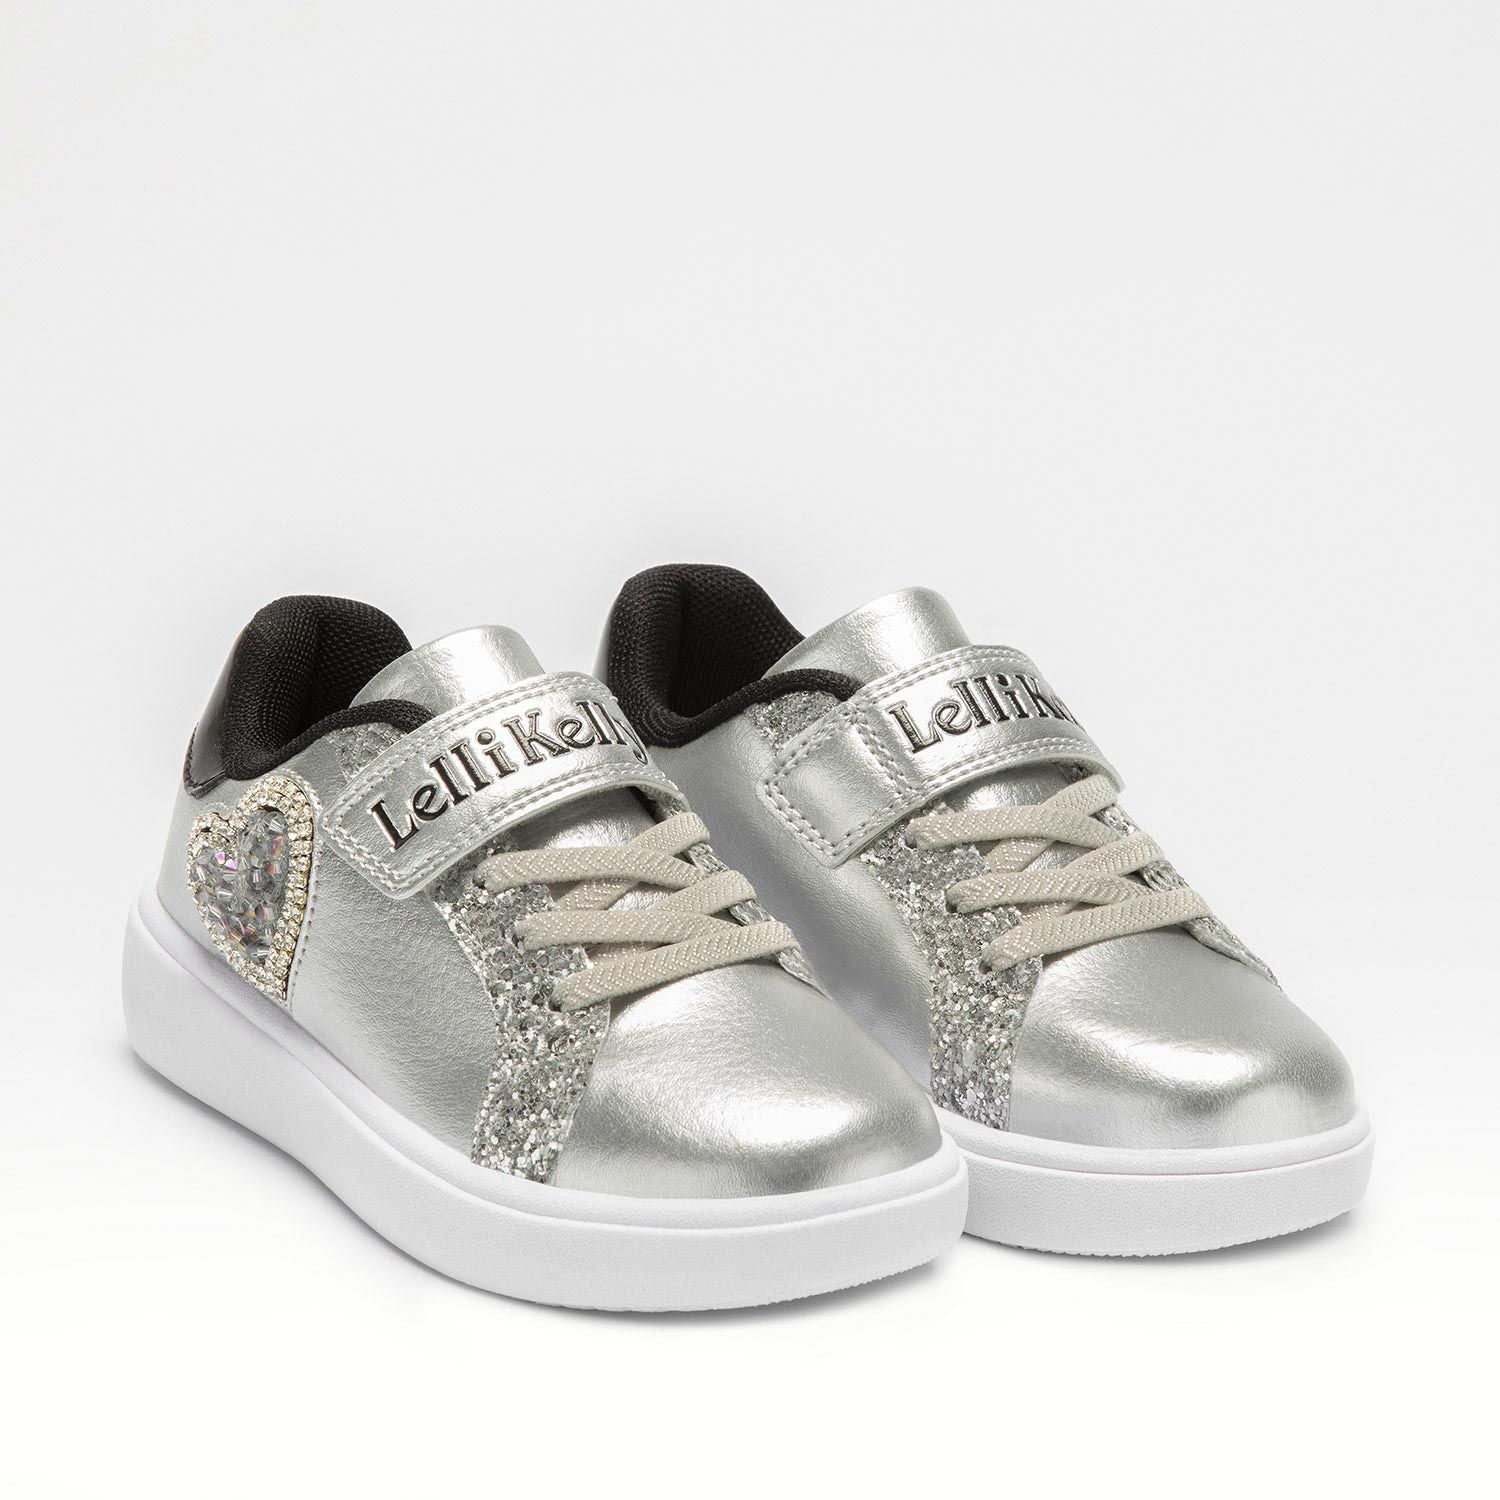 A pair of girls trainers by Lelli Kelly, style LKAA3828, with embellished heart detail in silver and black with single velcro fastening.